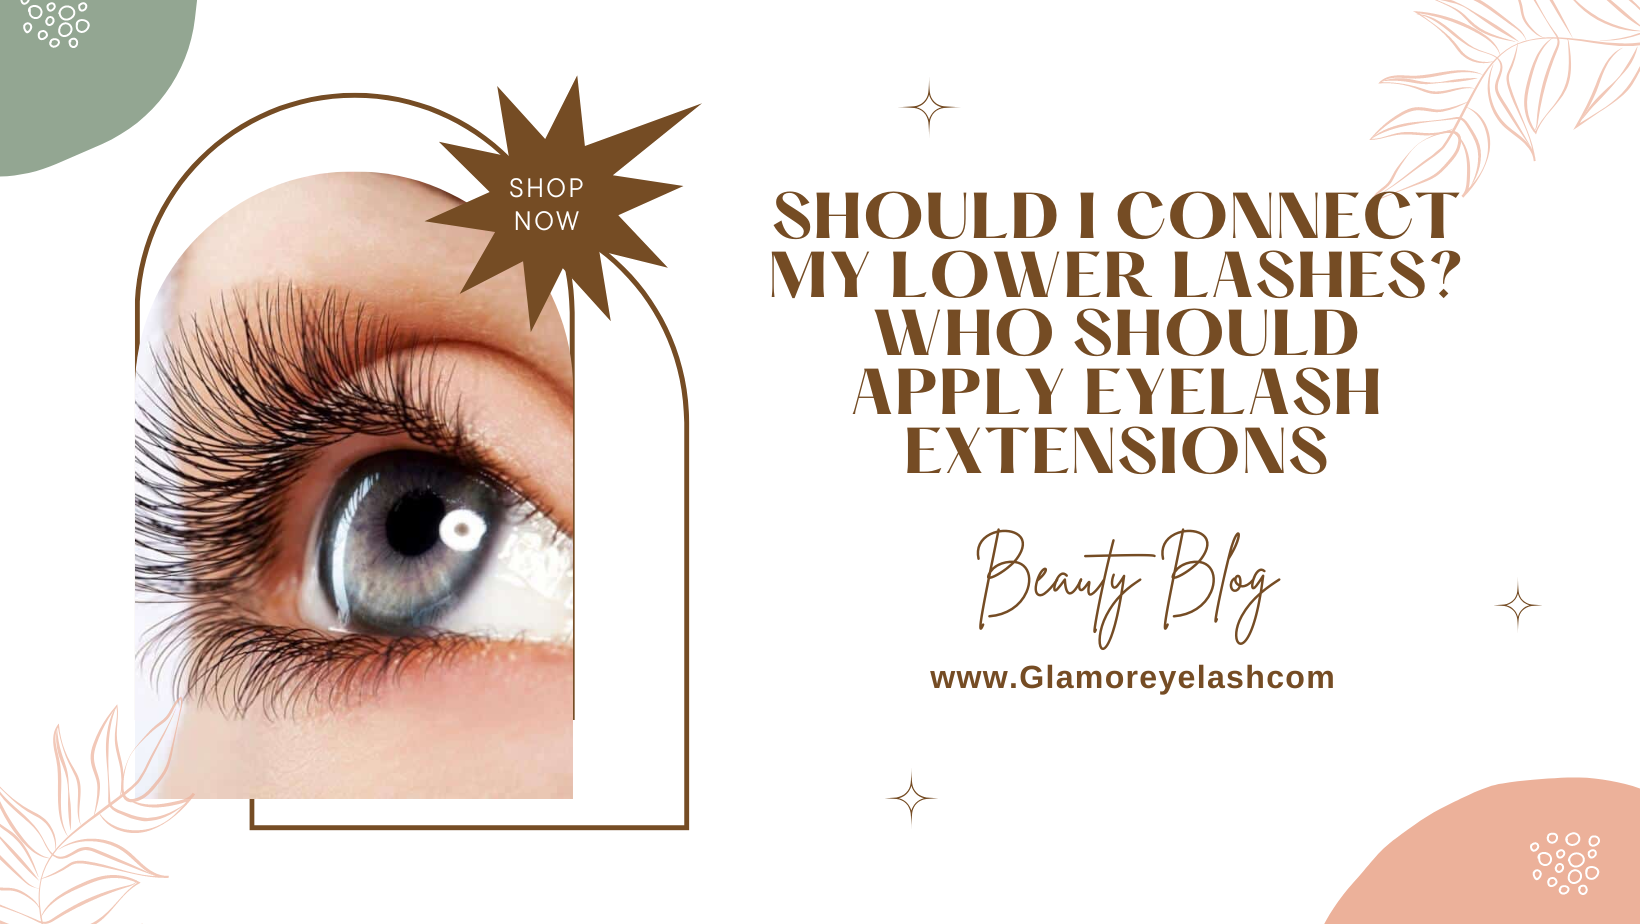 Should I connect my lower lashes? Who should apply eyelash extensions